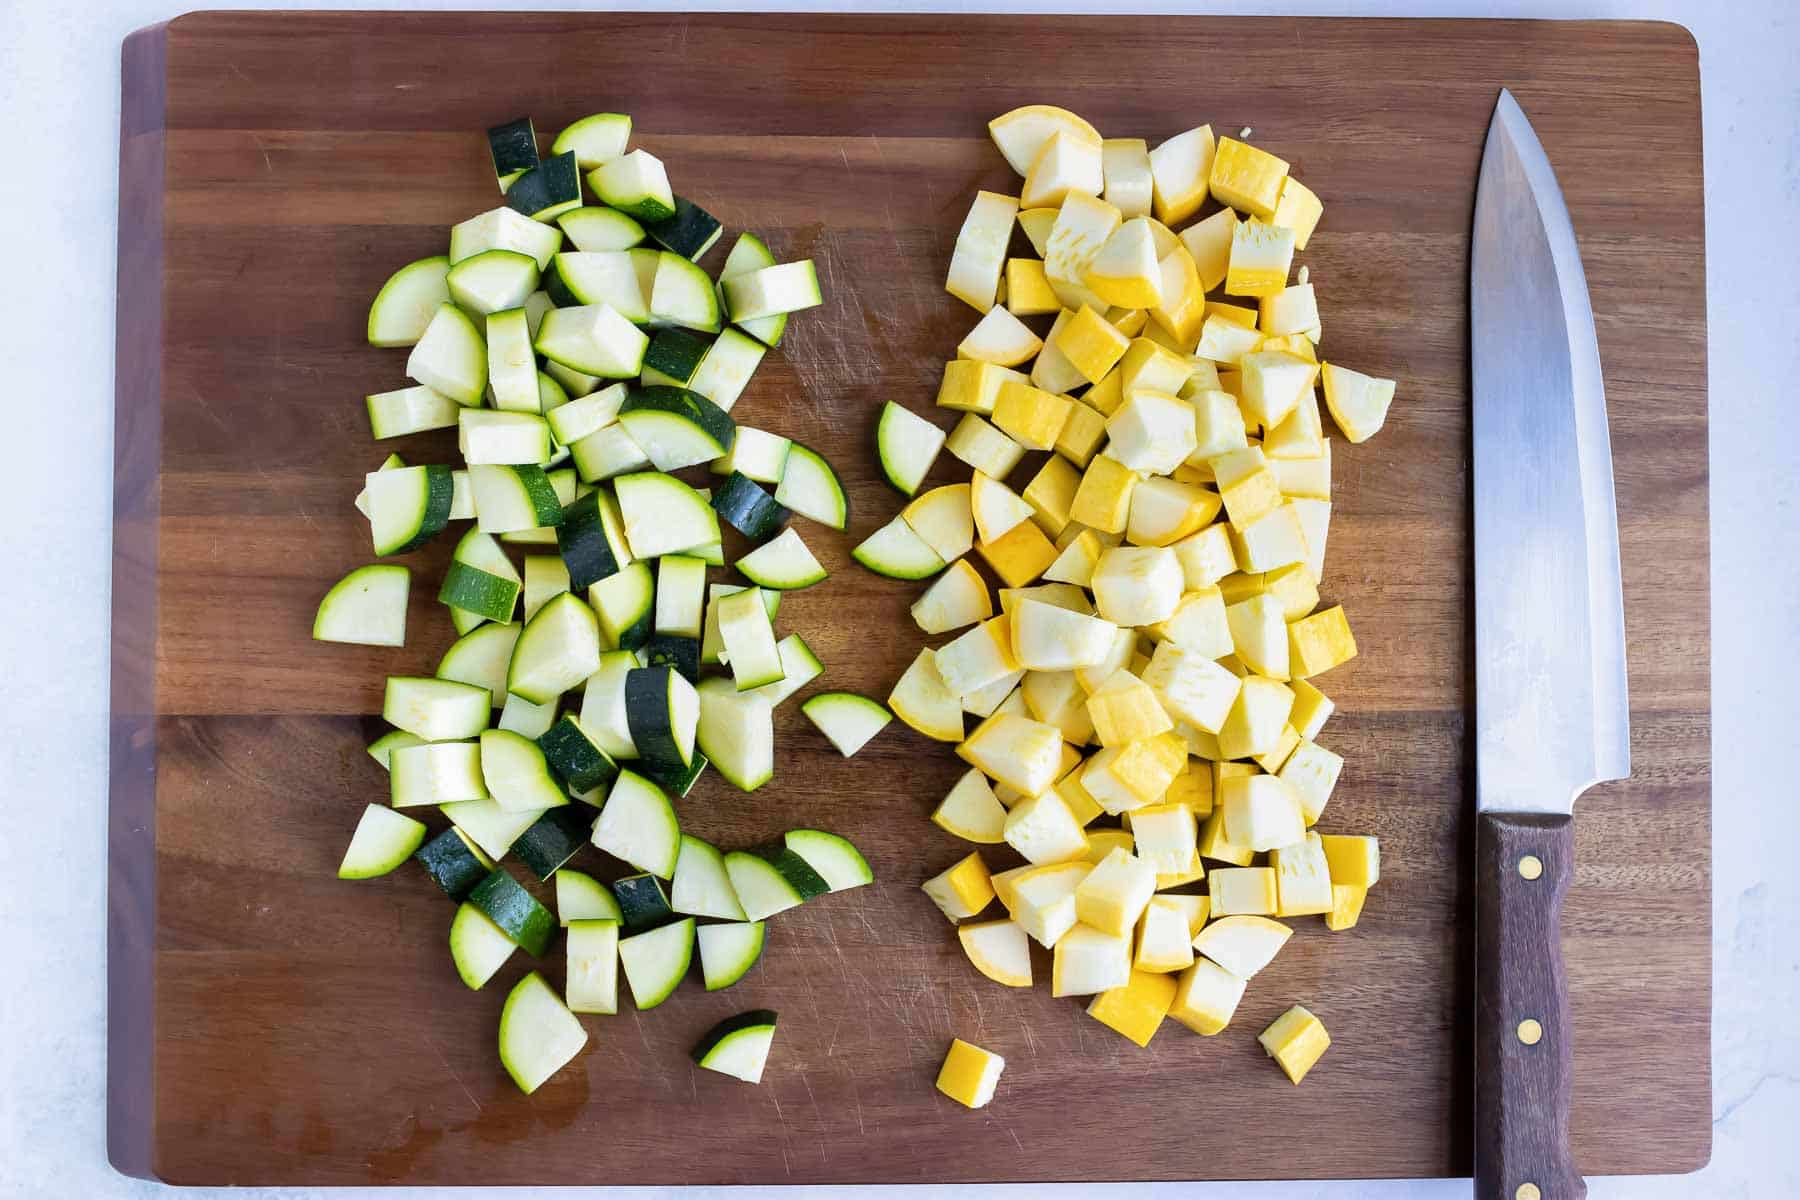 Diced zucchini and yellow squash are ready for this recipe.